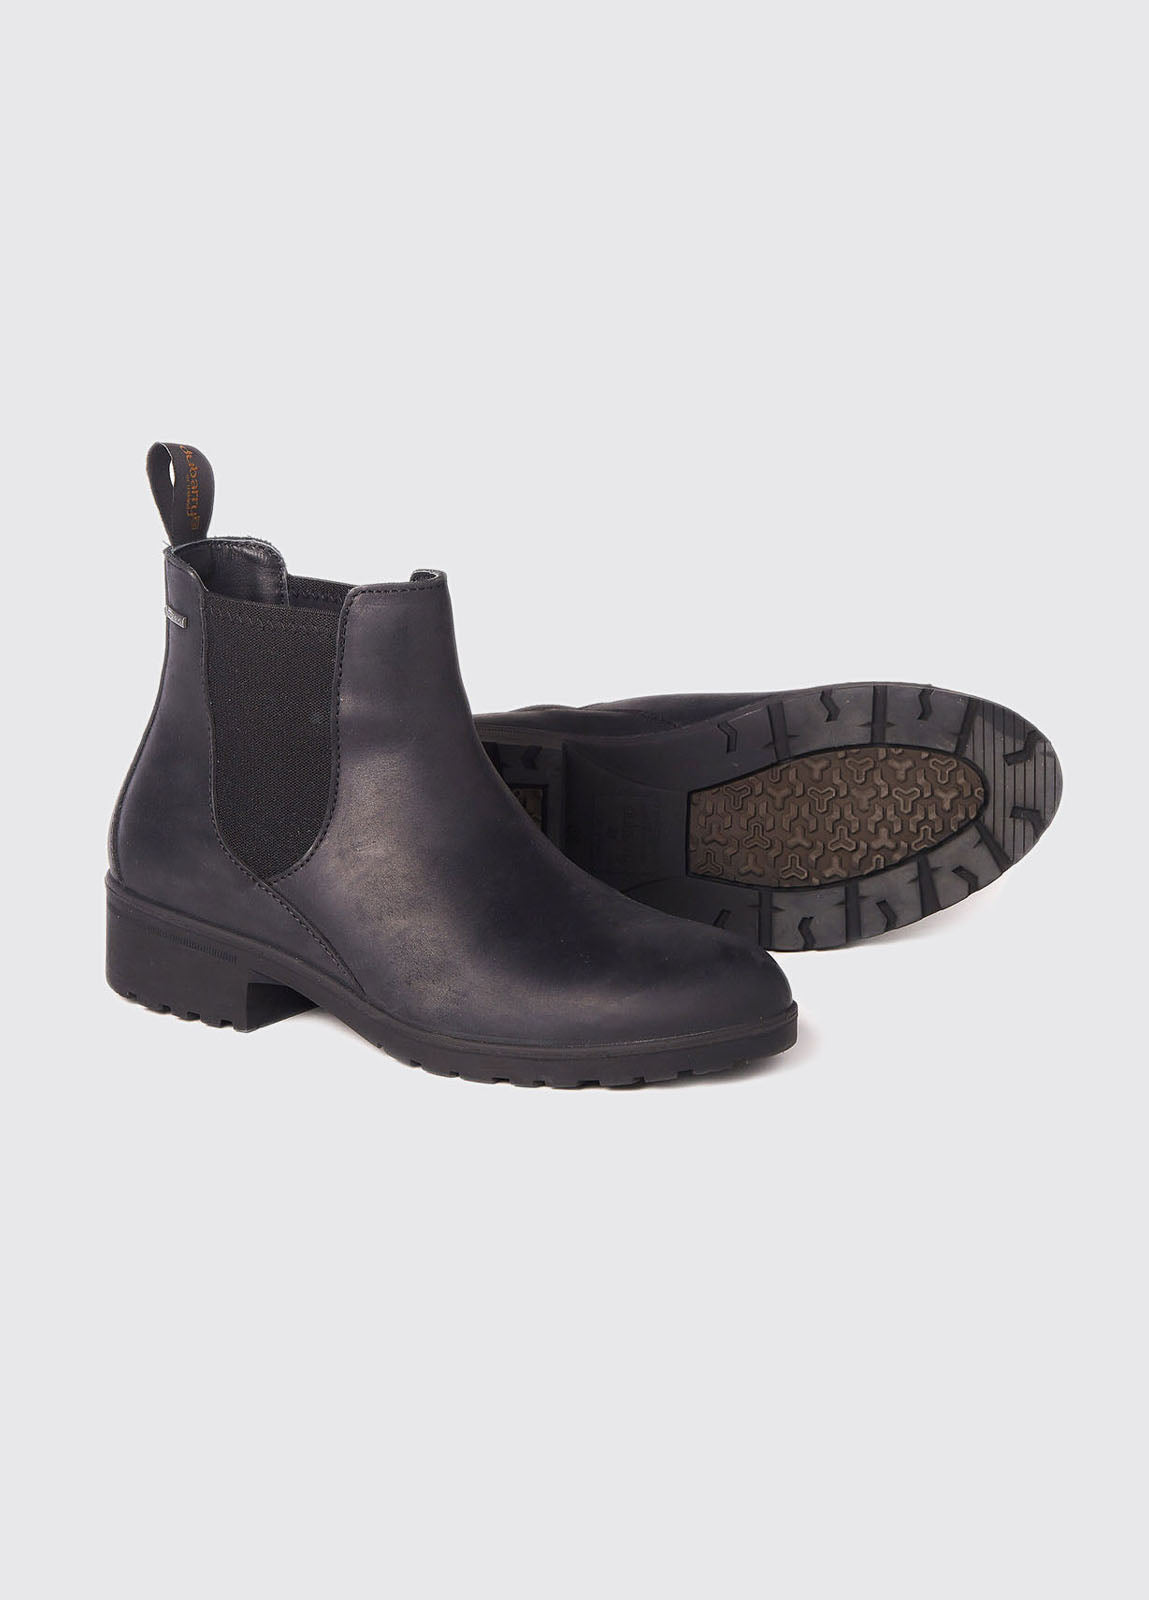 Dubarry Waterford Chelsea Boot